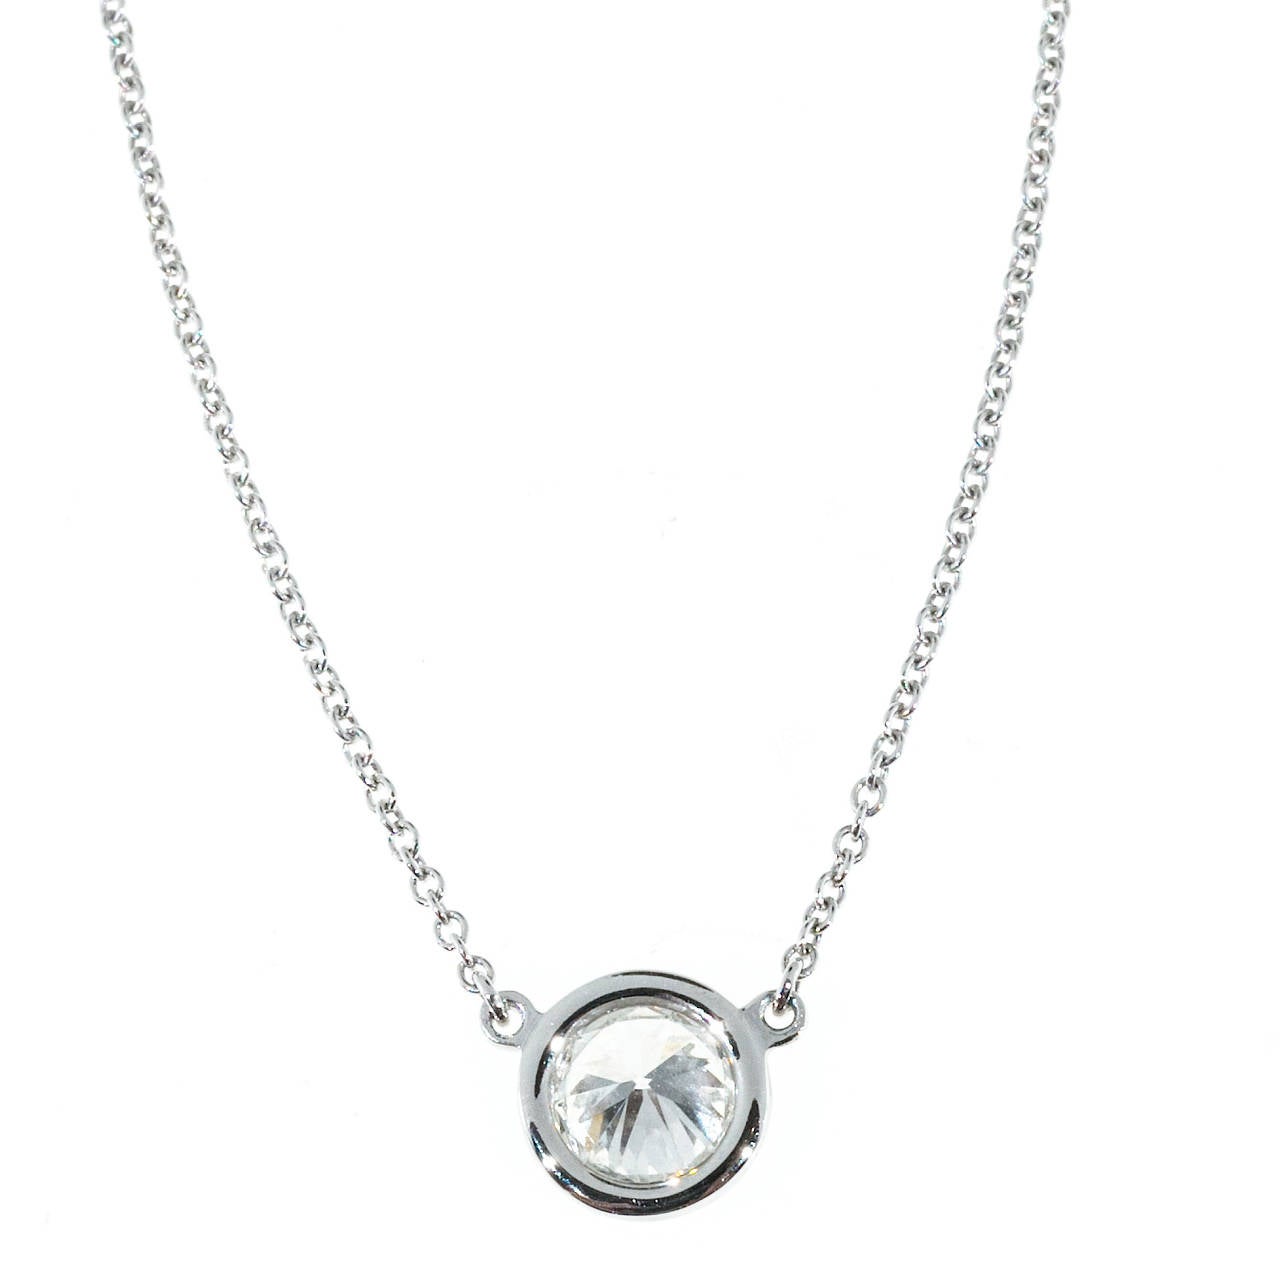 Tiffany & Co. Elsa Peretti Diamonds by the Yard pendant fully stamped and serial numbered.

1 round diamond, approx. total weight .62cts, E-F, VVS2
Platinum
Stamped: PT 950
Tested: Platinum
Hallmark: Tiffany & Co Peretti
2.6 grams
Chain